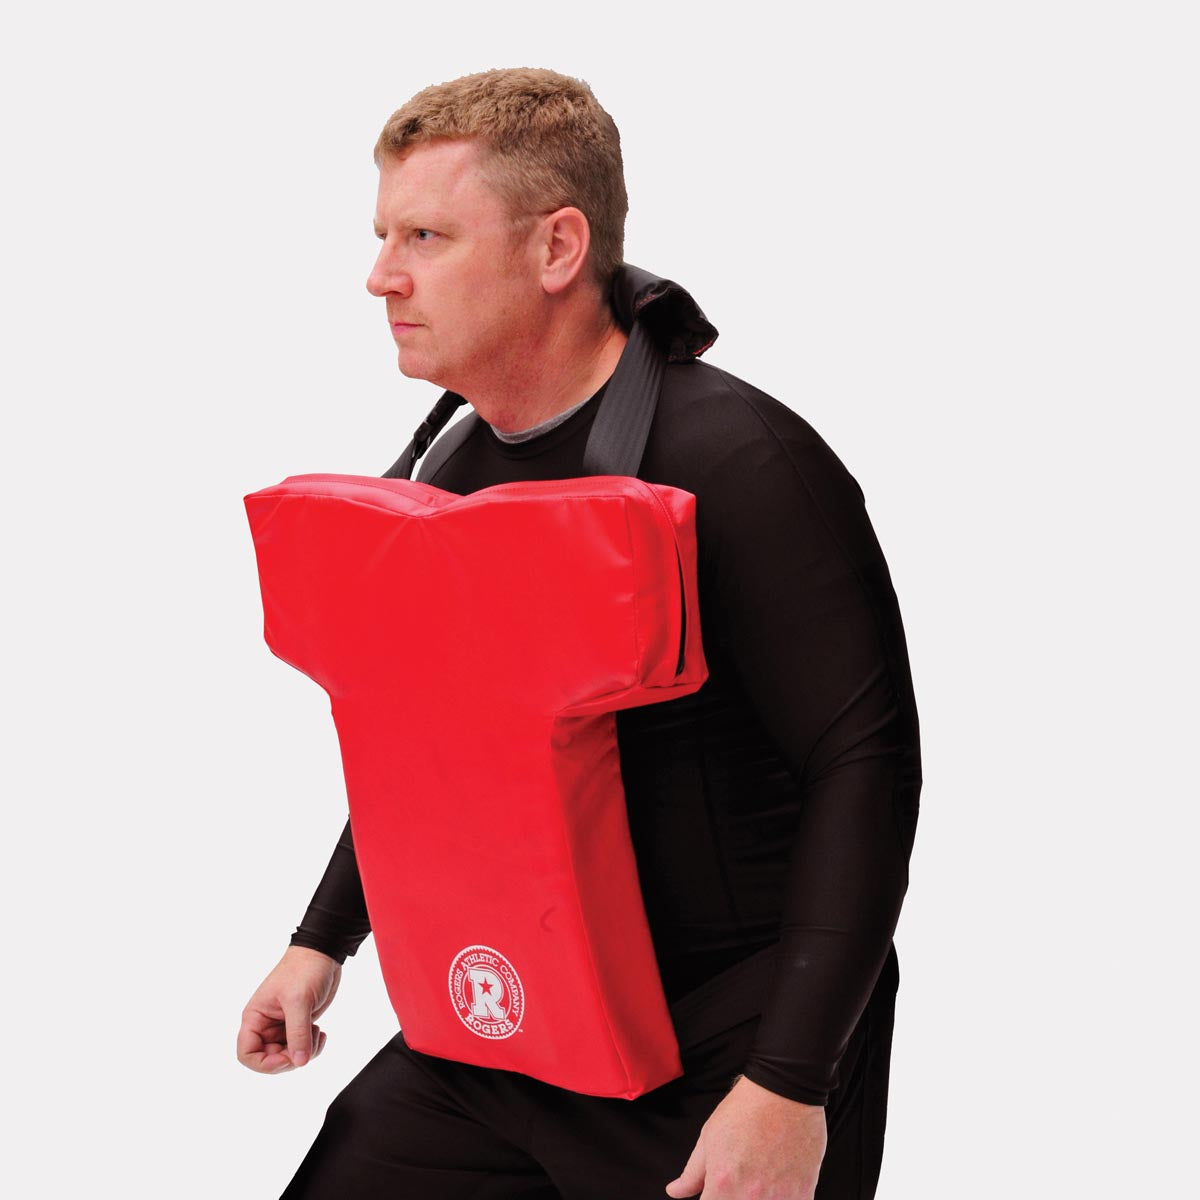 Rogers Athletic No-Hands Pad Blocking Shield